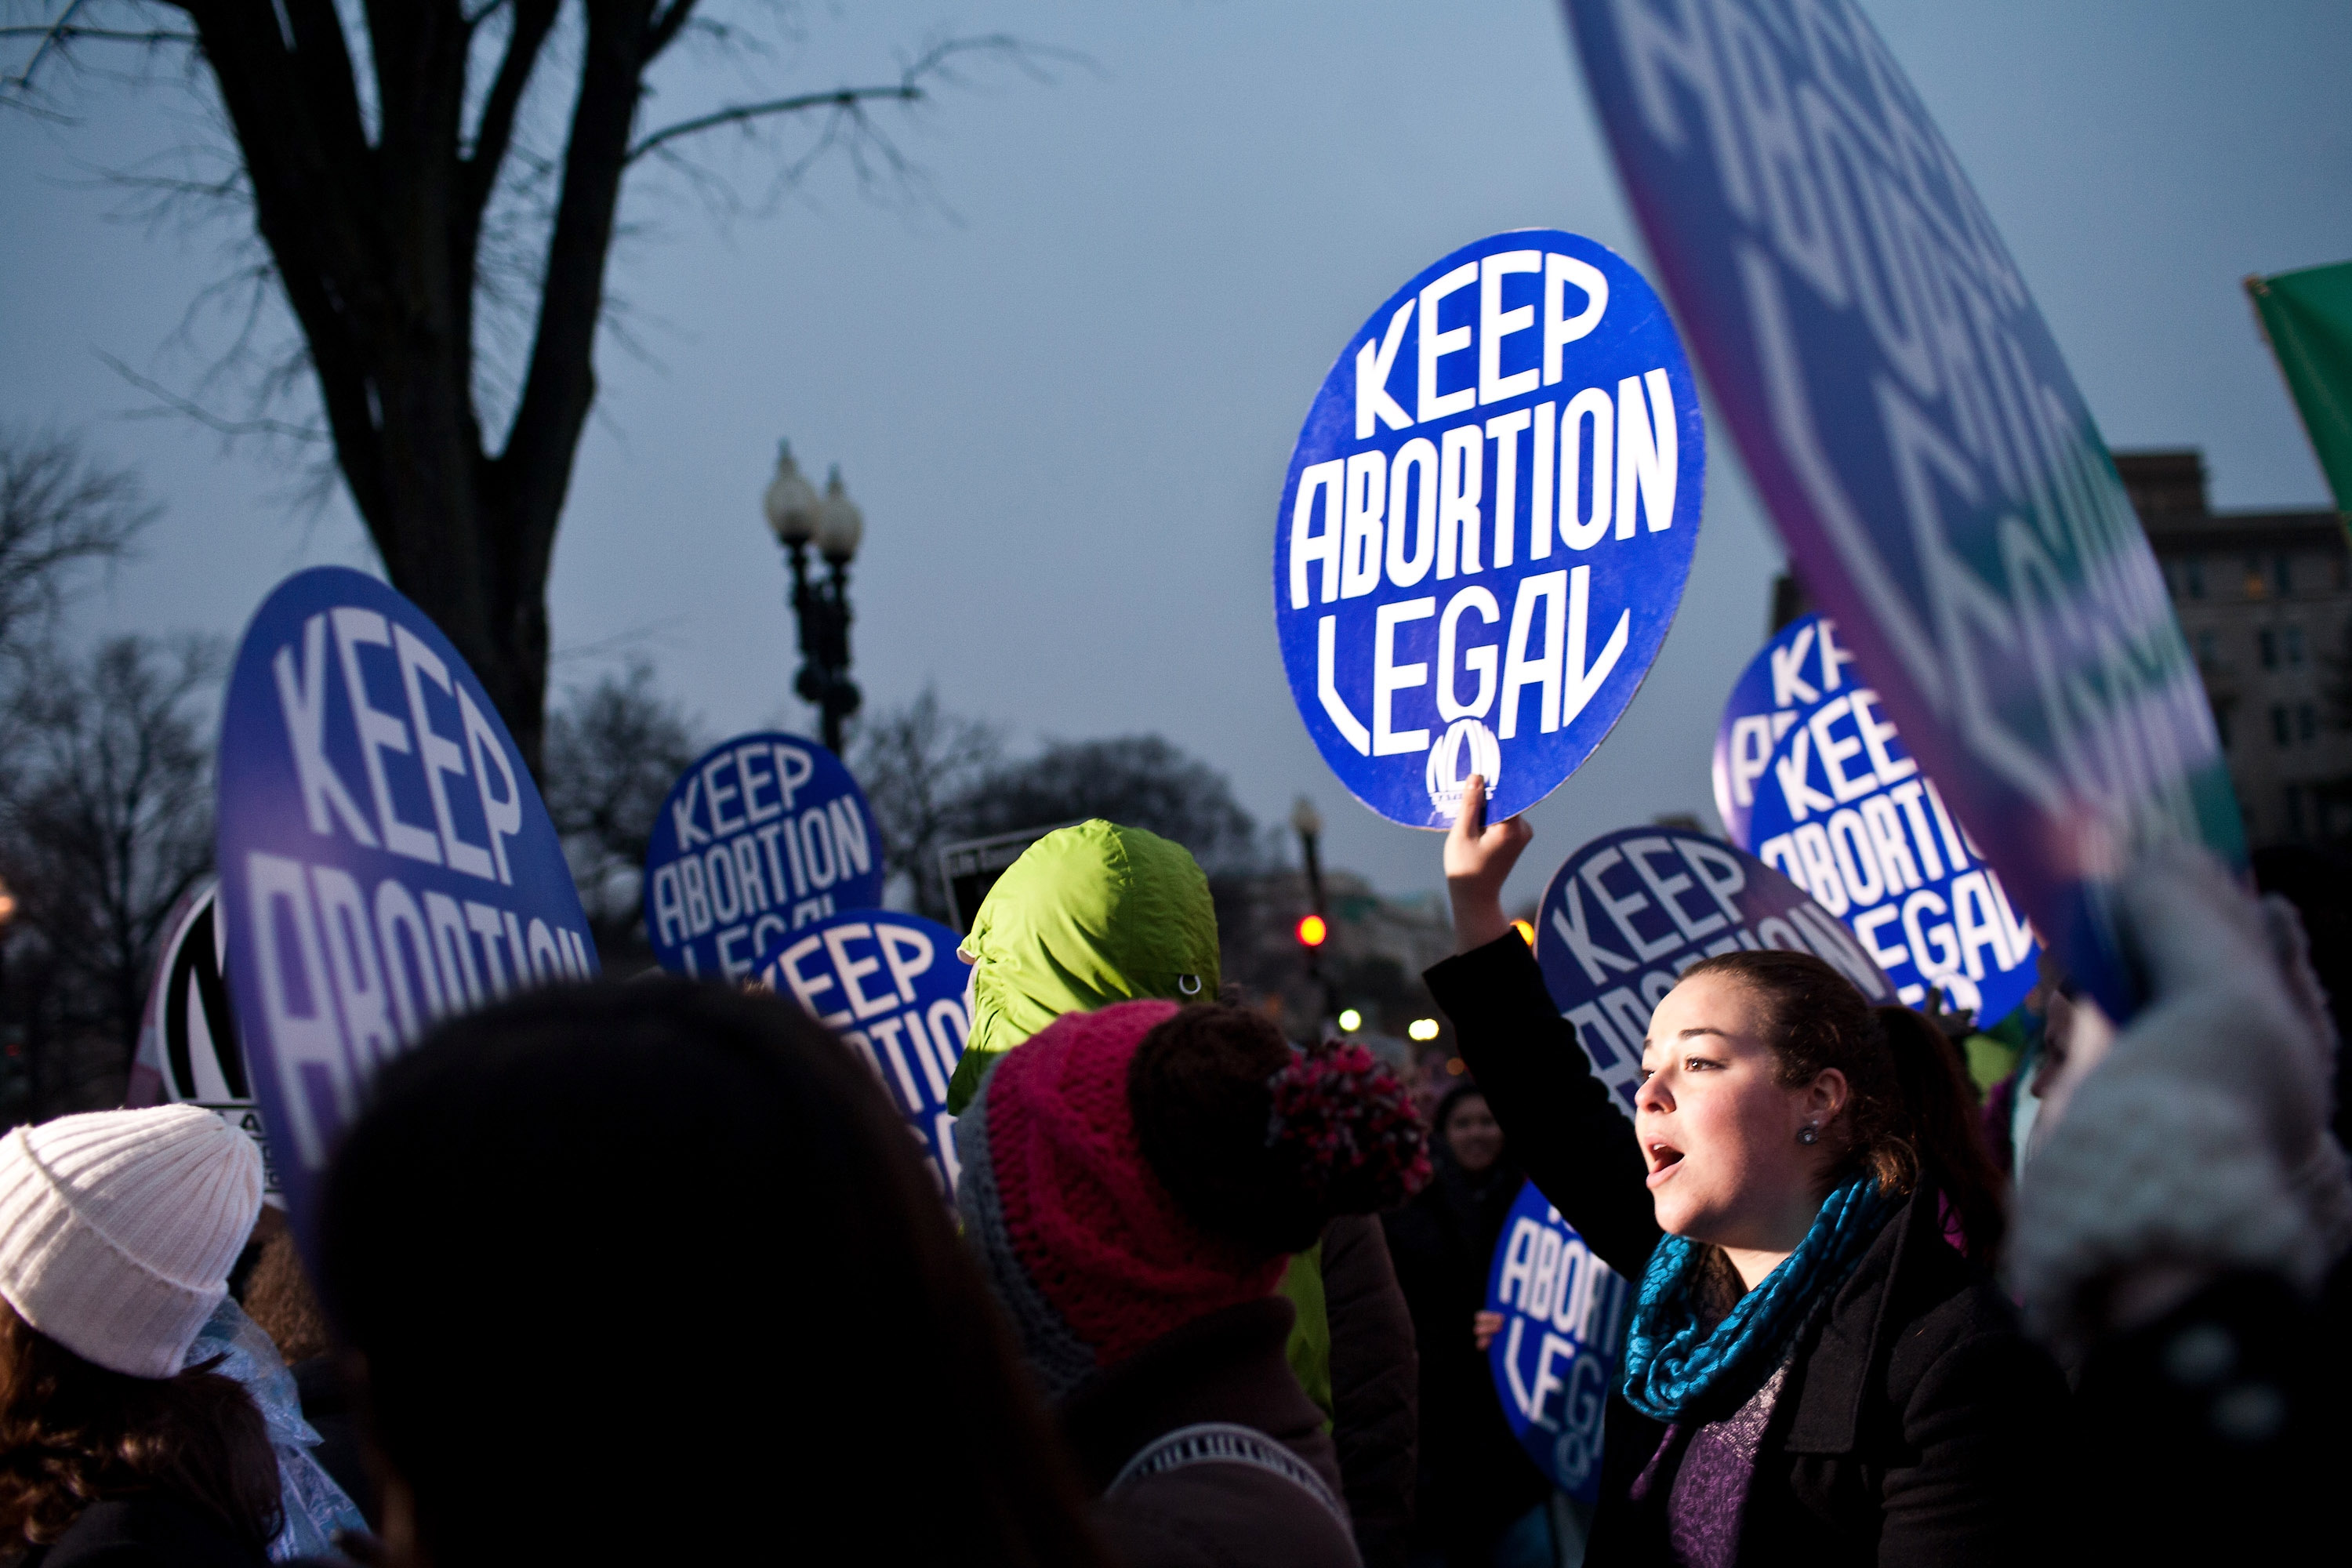 A pro-choice protester outside the Supreme Court.